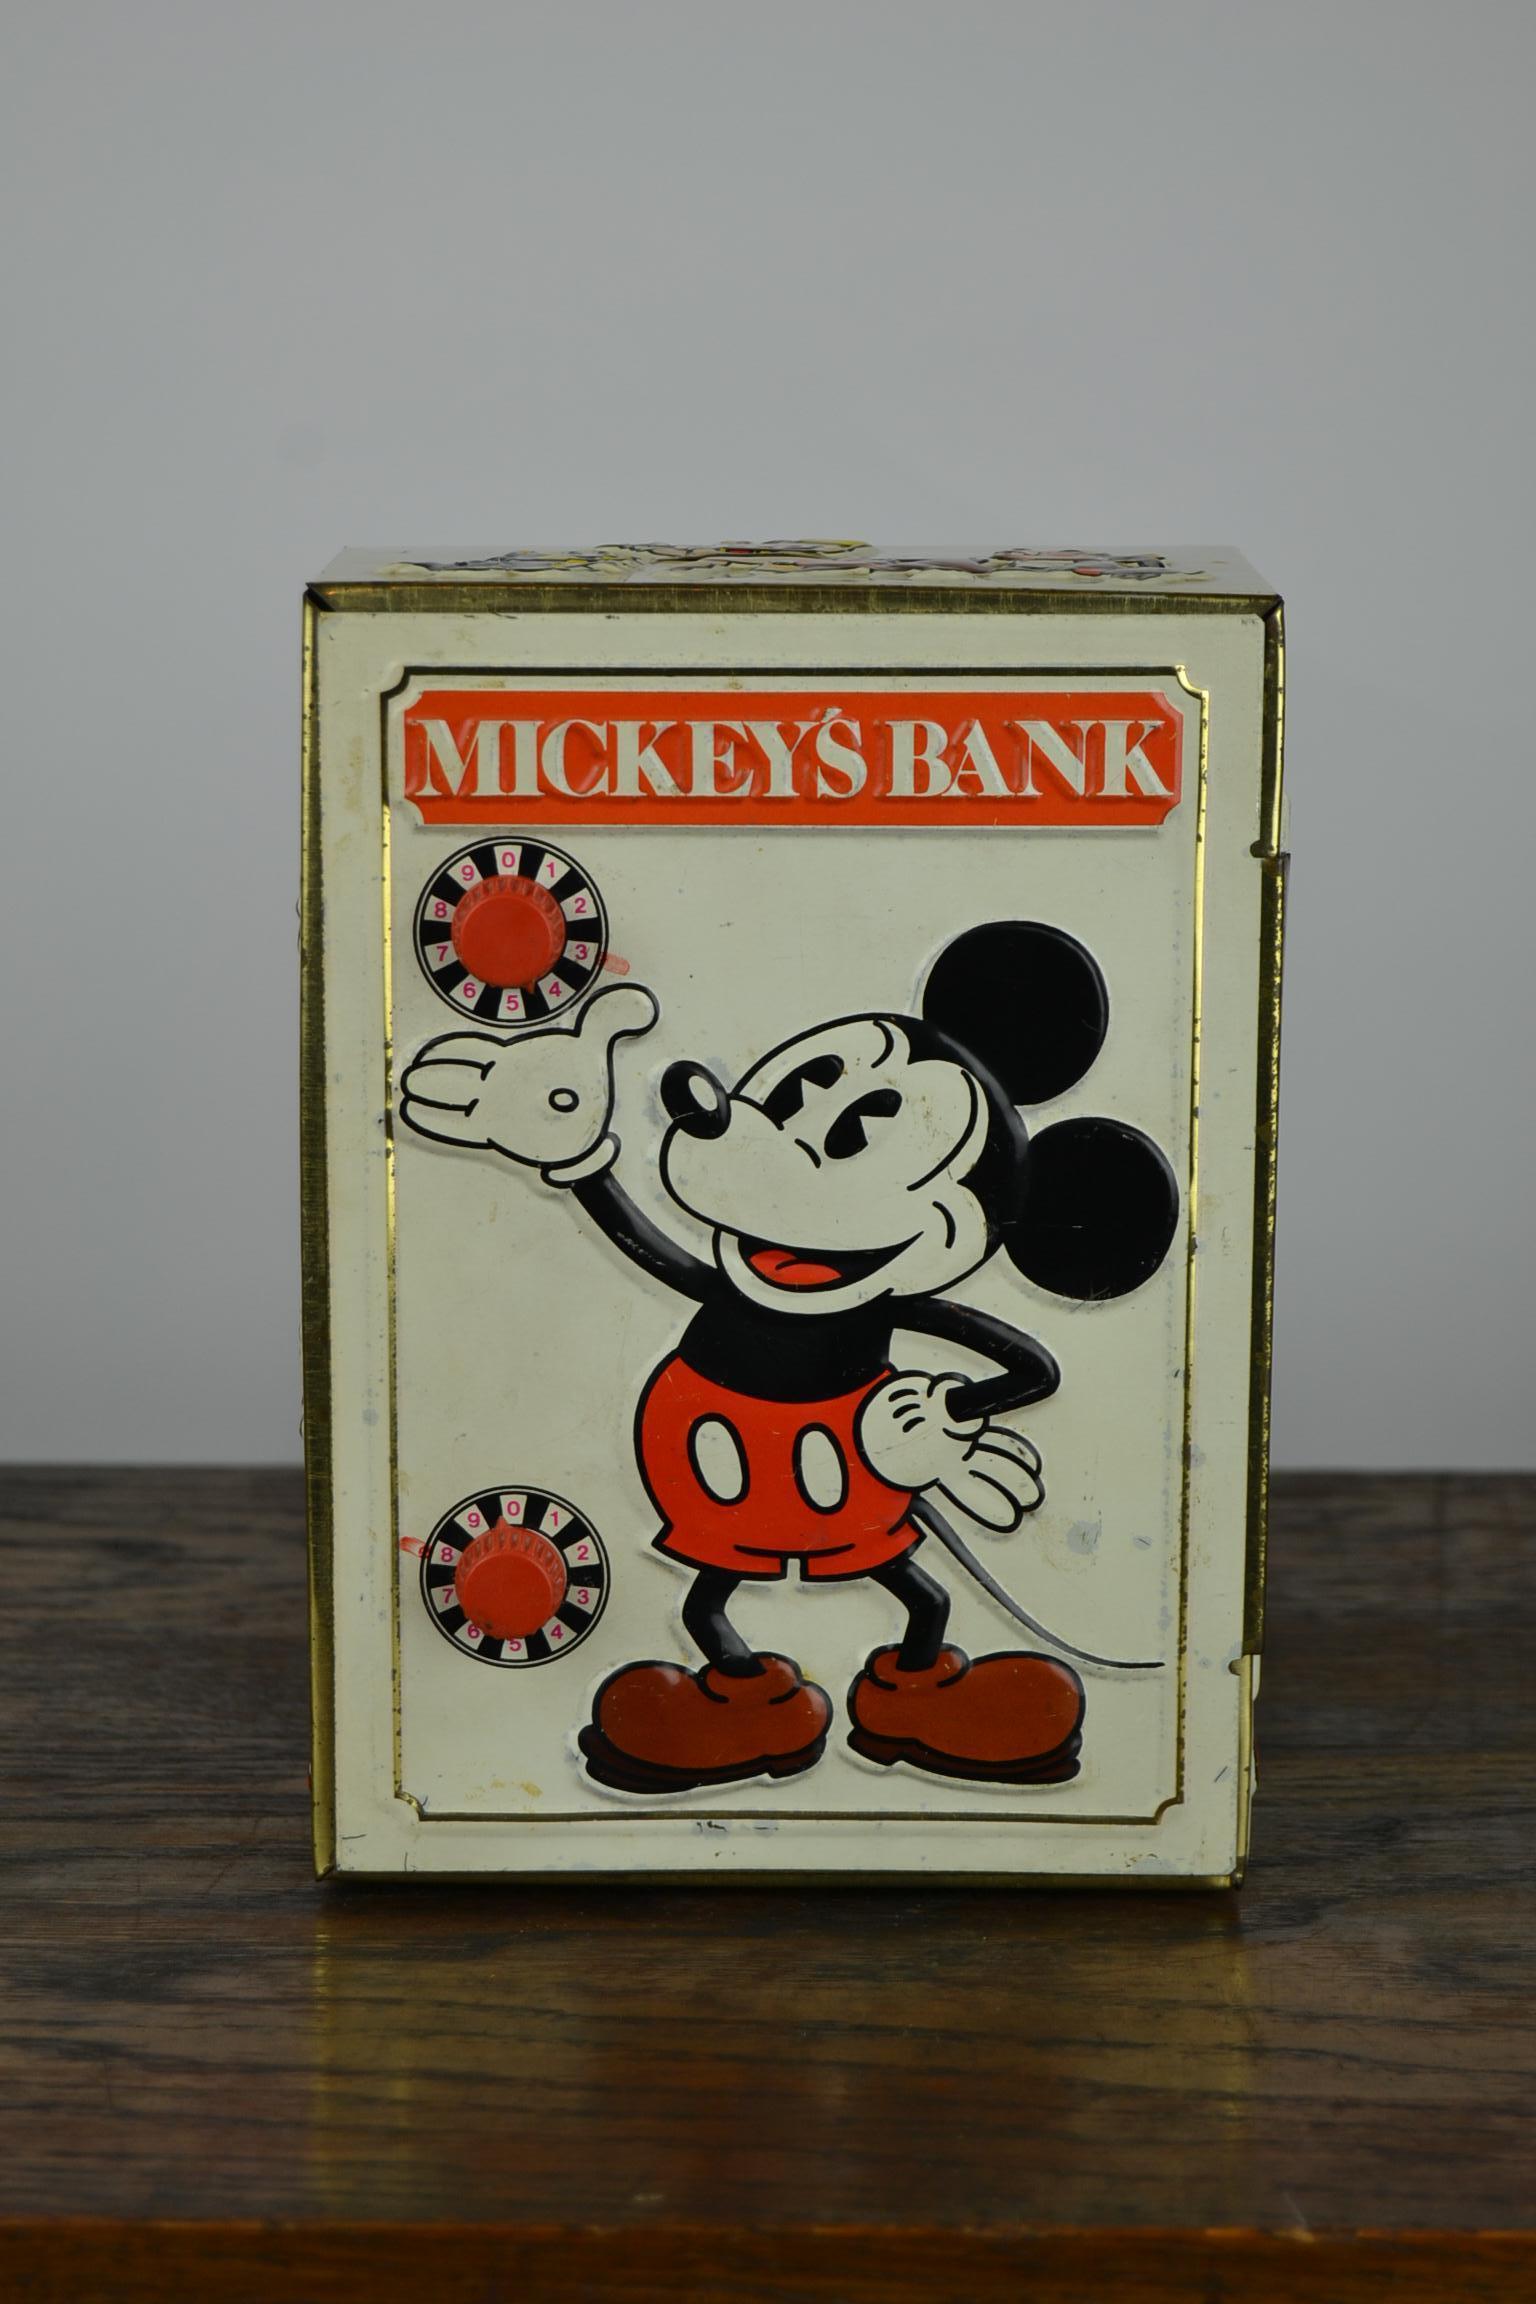 Vintage toy coin bank - Bank Safe with the famous Walt Disney Animation Characters:
Mickey Mouse, Goofy, Pluto, Piglet, Minney Mouse, Donald Duck.
All this comic figures are embossed on the tin bank.
The miniature safe has 2 working combination